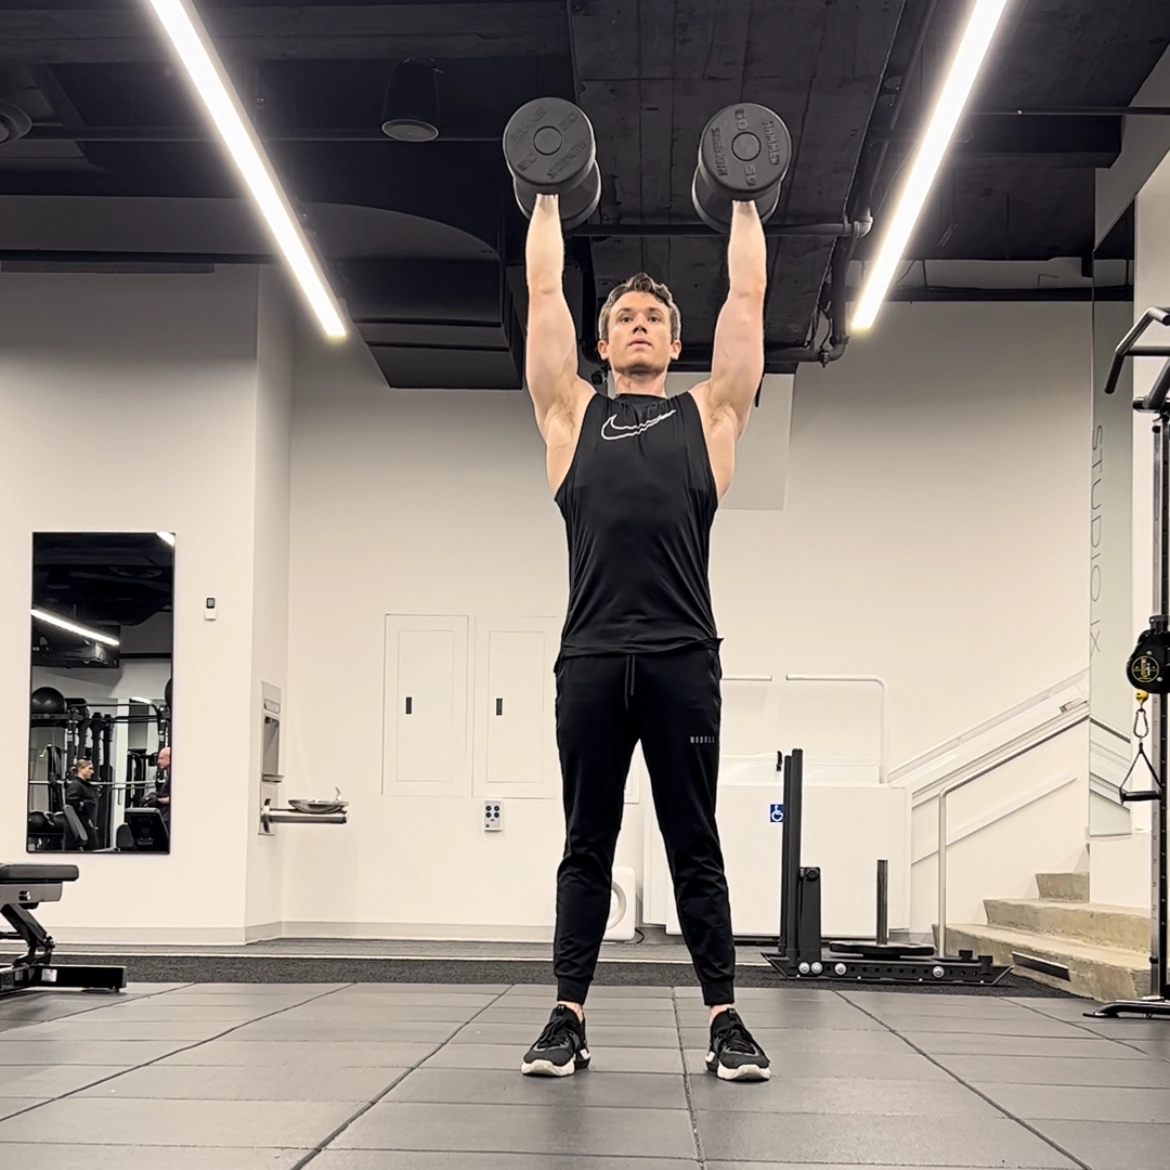 Cameron McCune does a dumbbell exercise at a workout facility. He wears black athletic pants, a black sleeveless shirt and black sneakers. He stands with his feet shoulder-width apart, raises his arms straight above his head, holding a dumbbell in each hand.